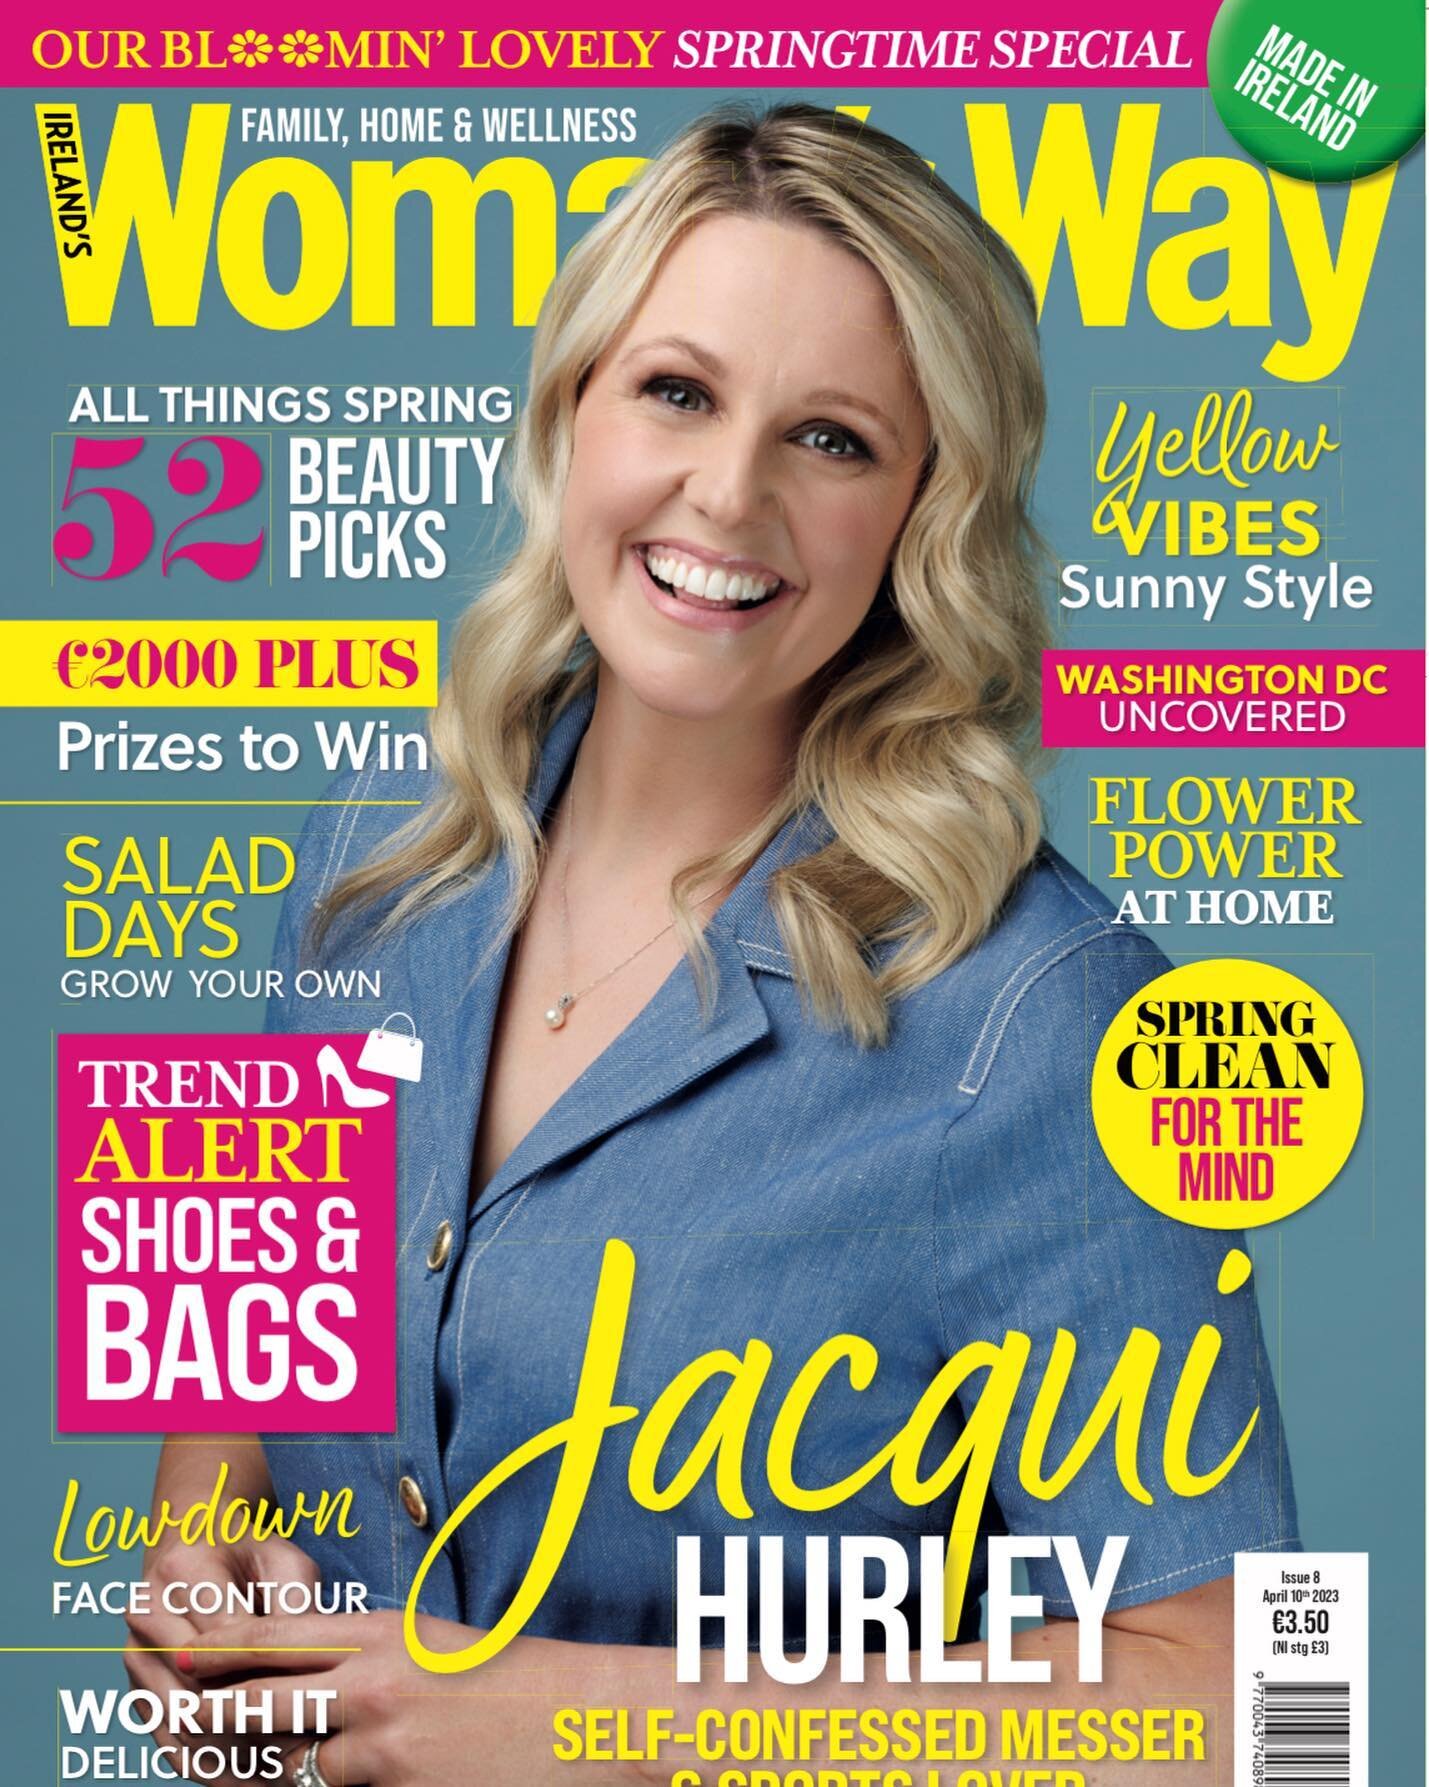 We&rsquo;re celebrating spring in full bloom in the new issue of Woman&rsquo;s Way. 

The amazing Jacqui Hurley is our cover star and chats about taking the helm of The Sunday Game.

We look into the science behind a mental health spring clean and th